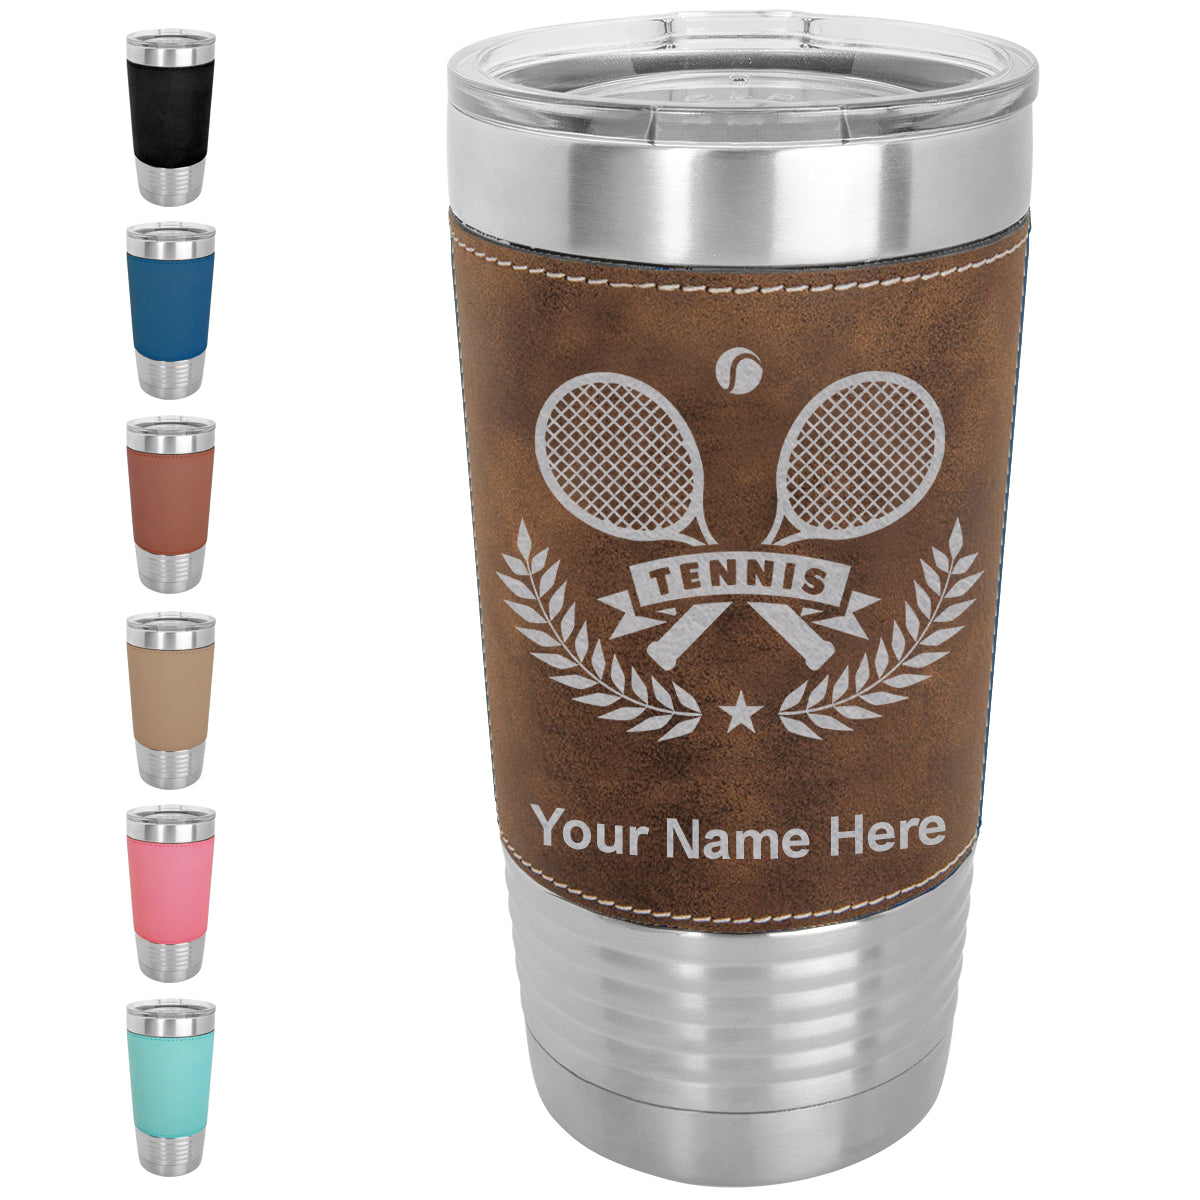 20oz Faux Leather Tumbler Mug, Tennis Rackets, Personalized Engraving Included